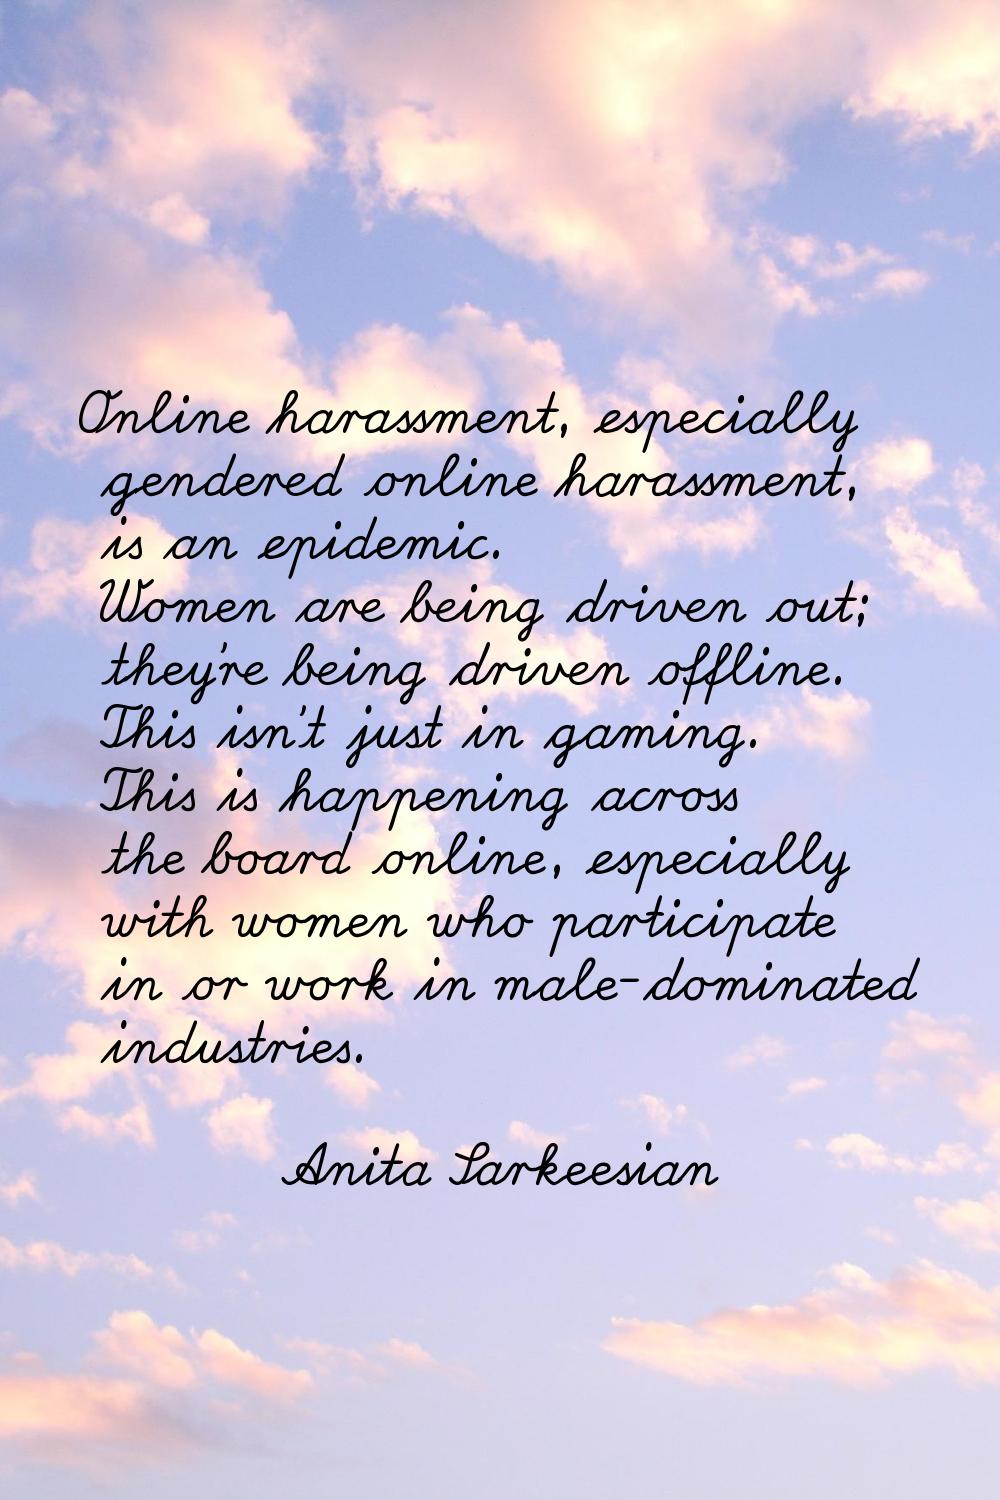 Online harassment, especially gendered online harassment, is an epidemic. Women are being driven ou